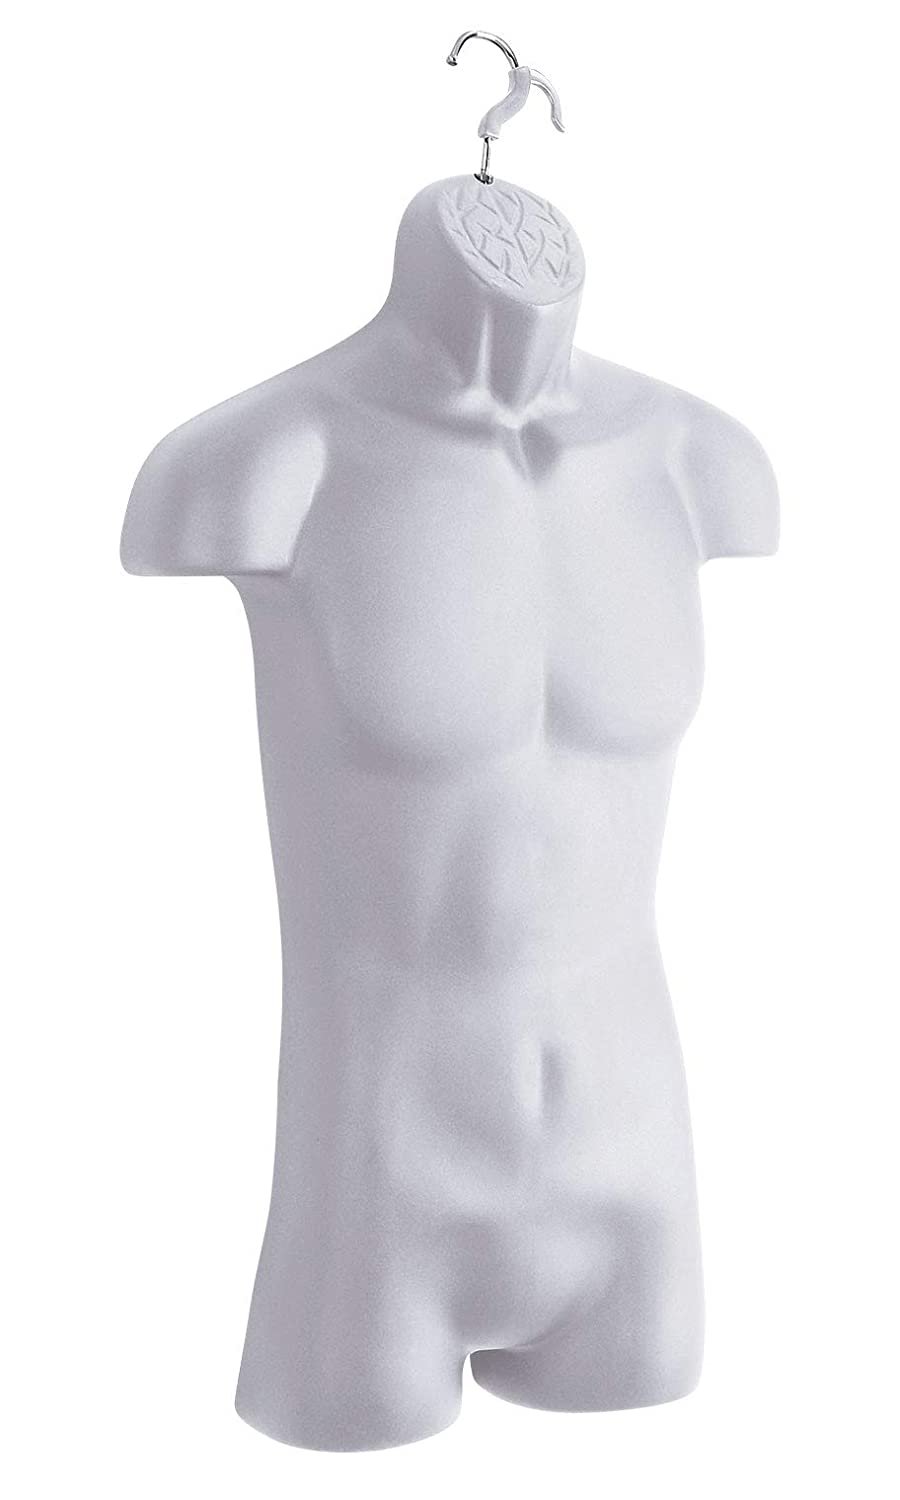 Mannequin male form for online reselling.jpg